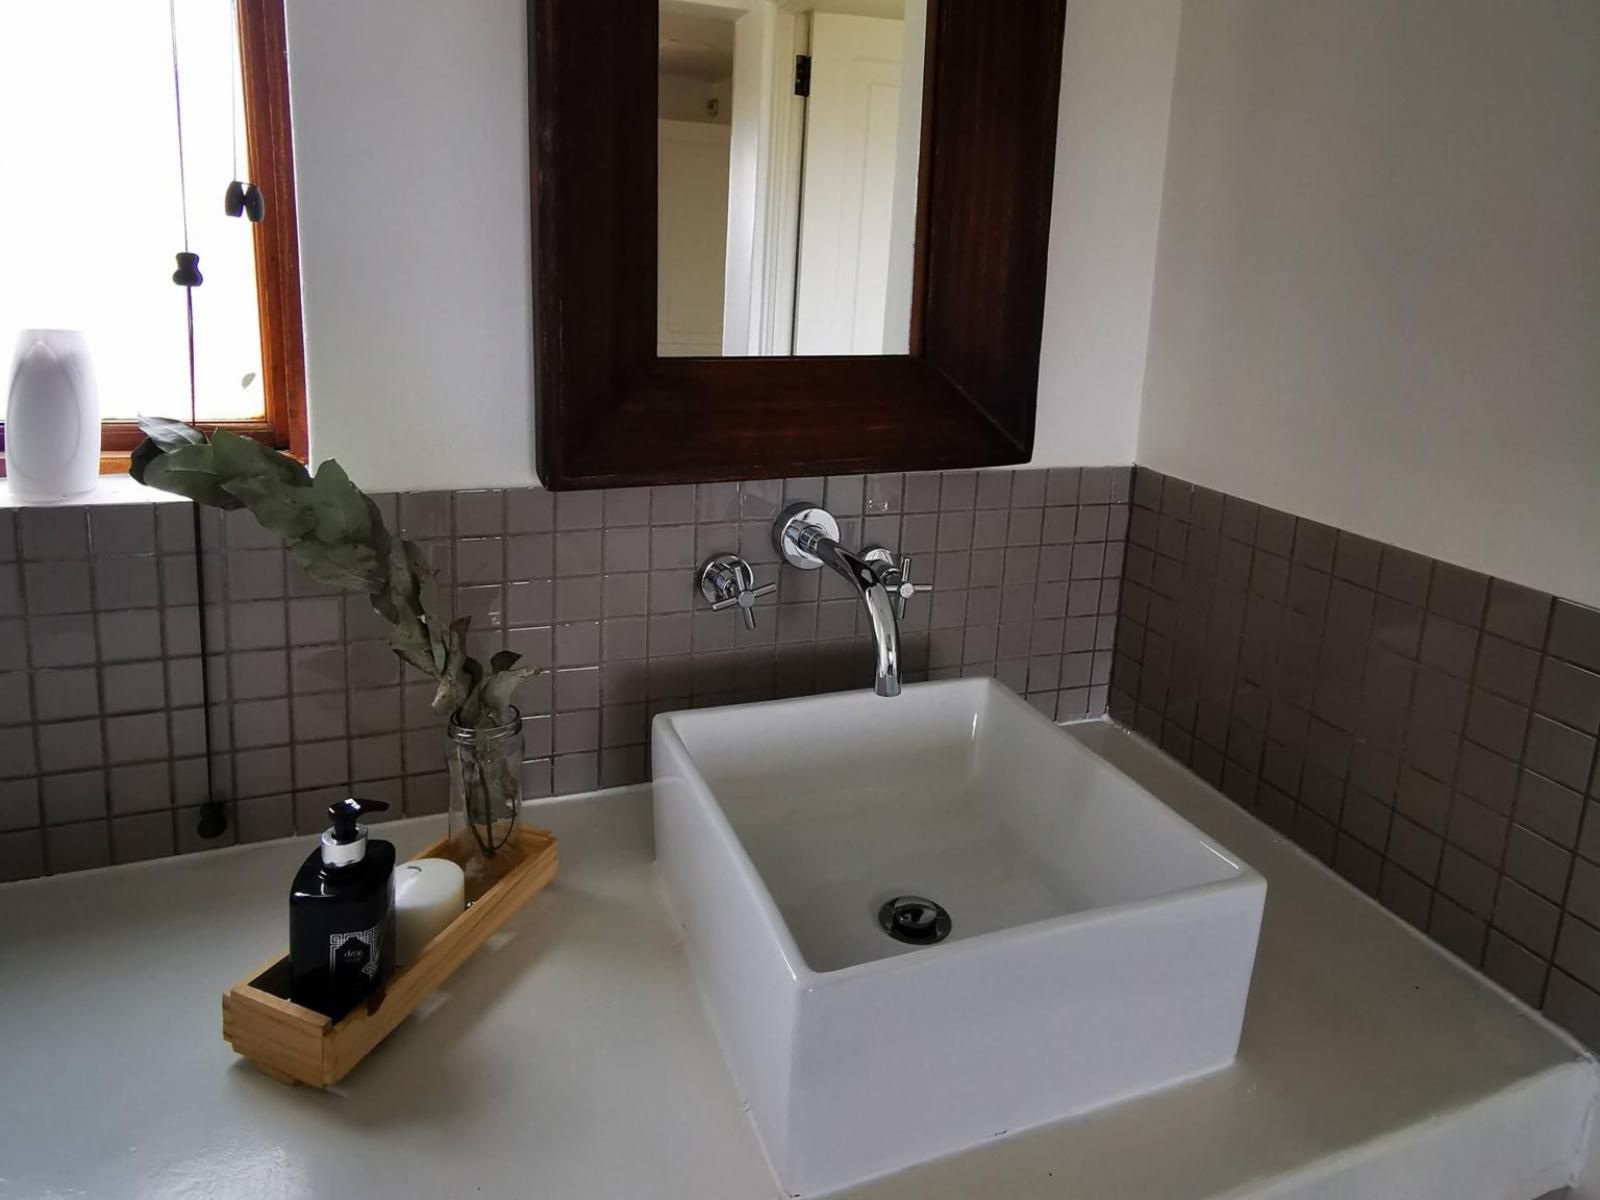 Troutmere Belfast Mpumalanga South Africa Unsaturated, Bathroom